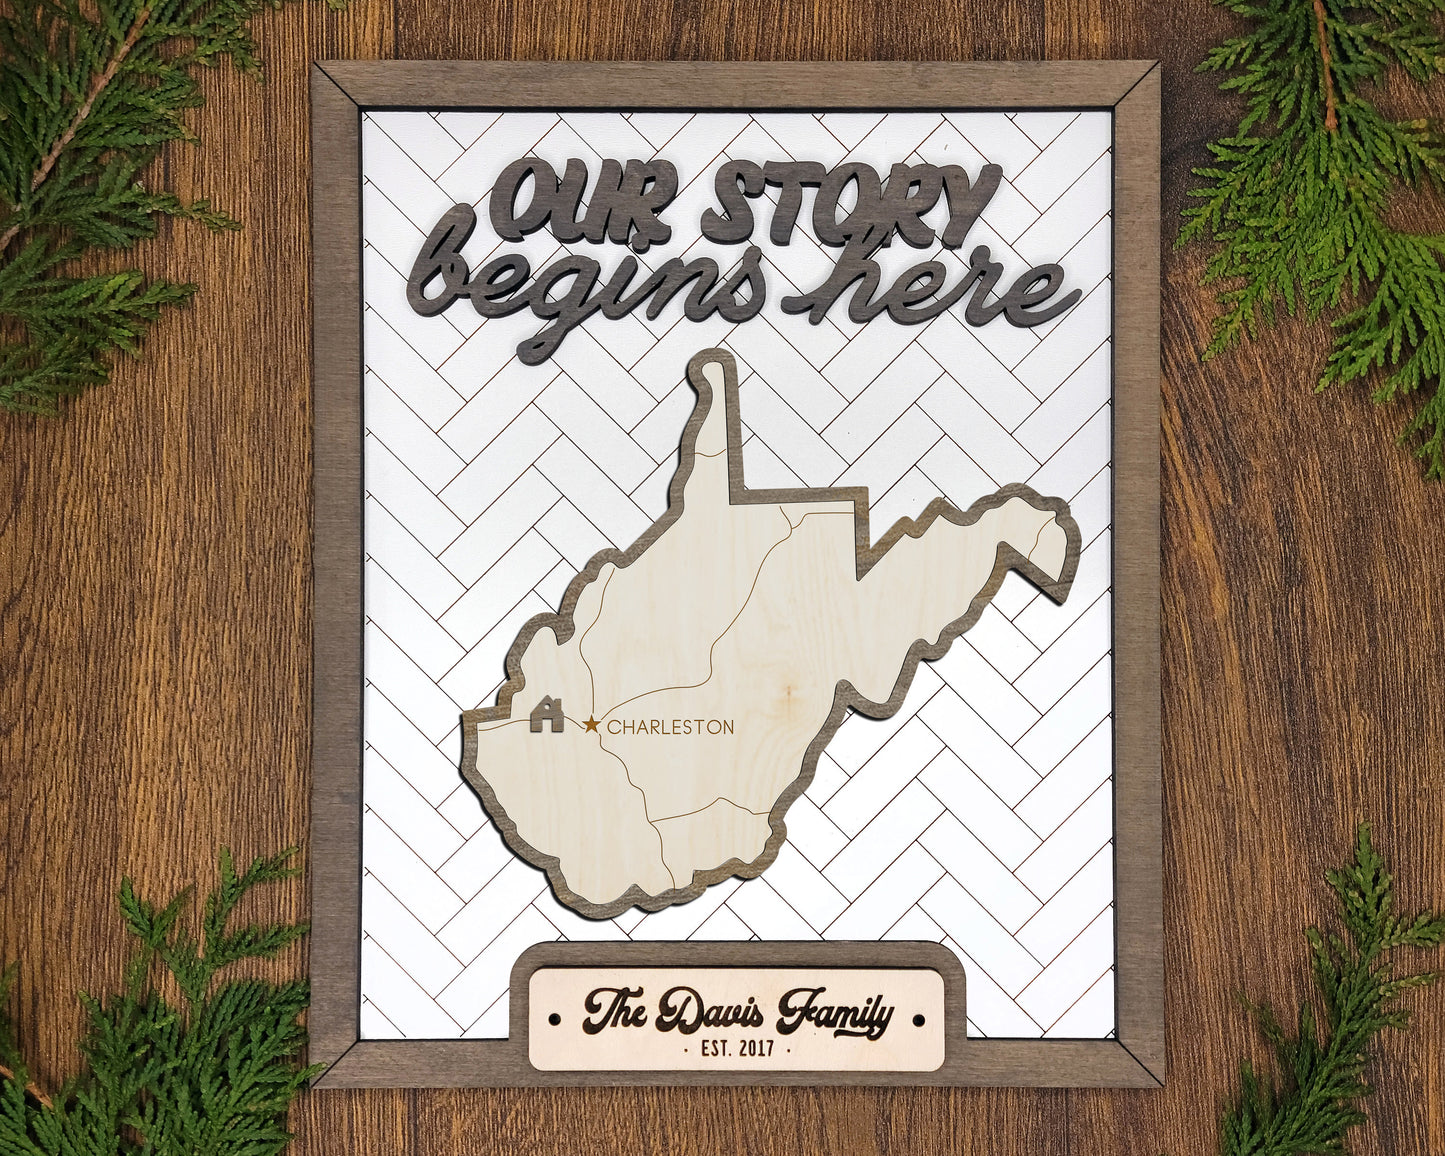 The West Virginia Frame - 13 text options, 12 backgrounds, 25 icons Included - Make over 7,500 designs - Glowforge & Lightburn Tested